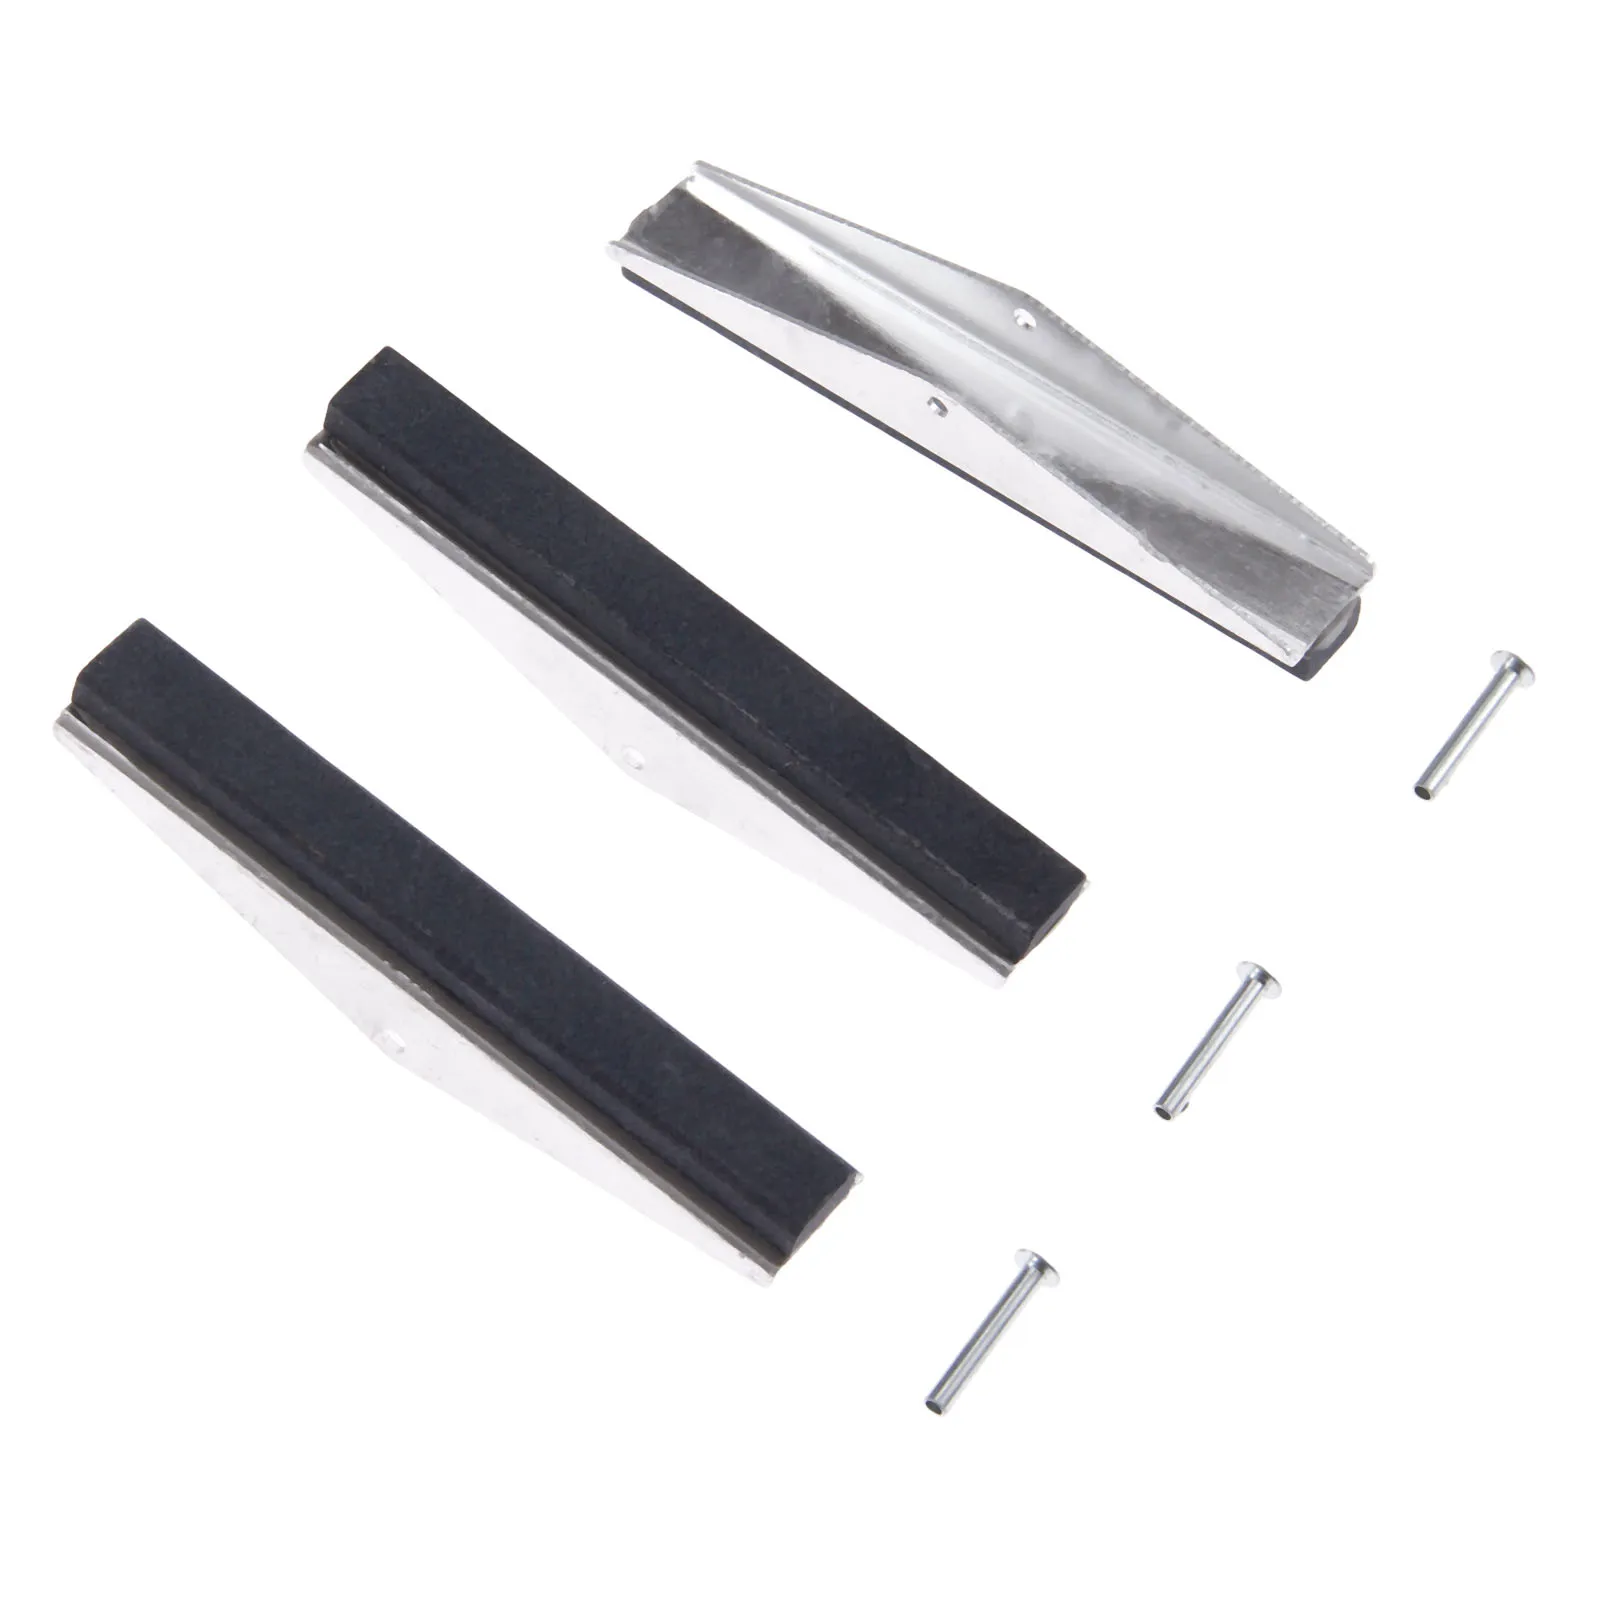 3 pcs 100mm Engine Cylinder Hone Replacement Stones Brake Piston Professional Fixed Angle Cylinder Hone Tool